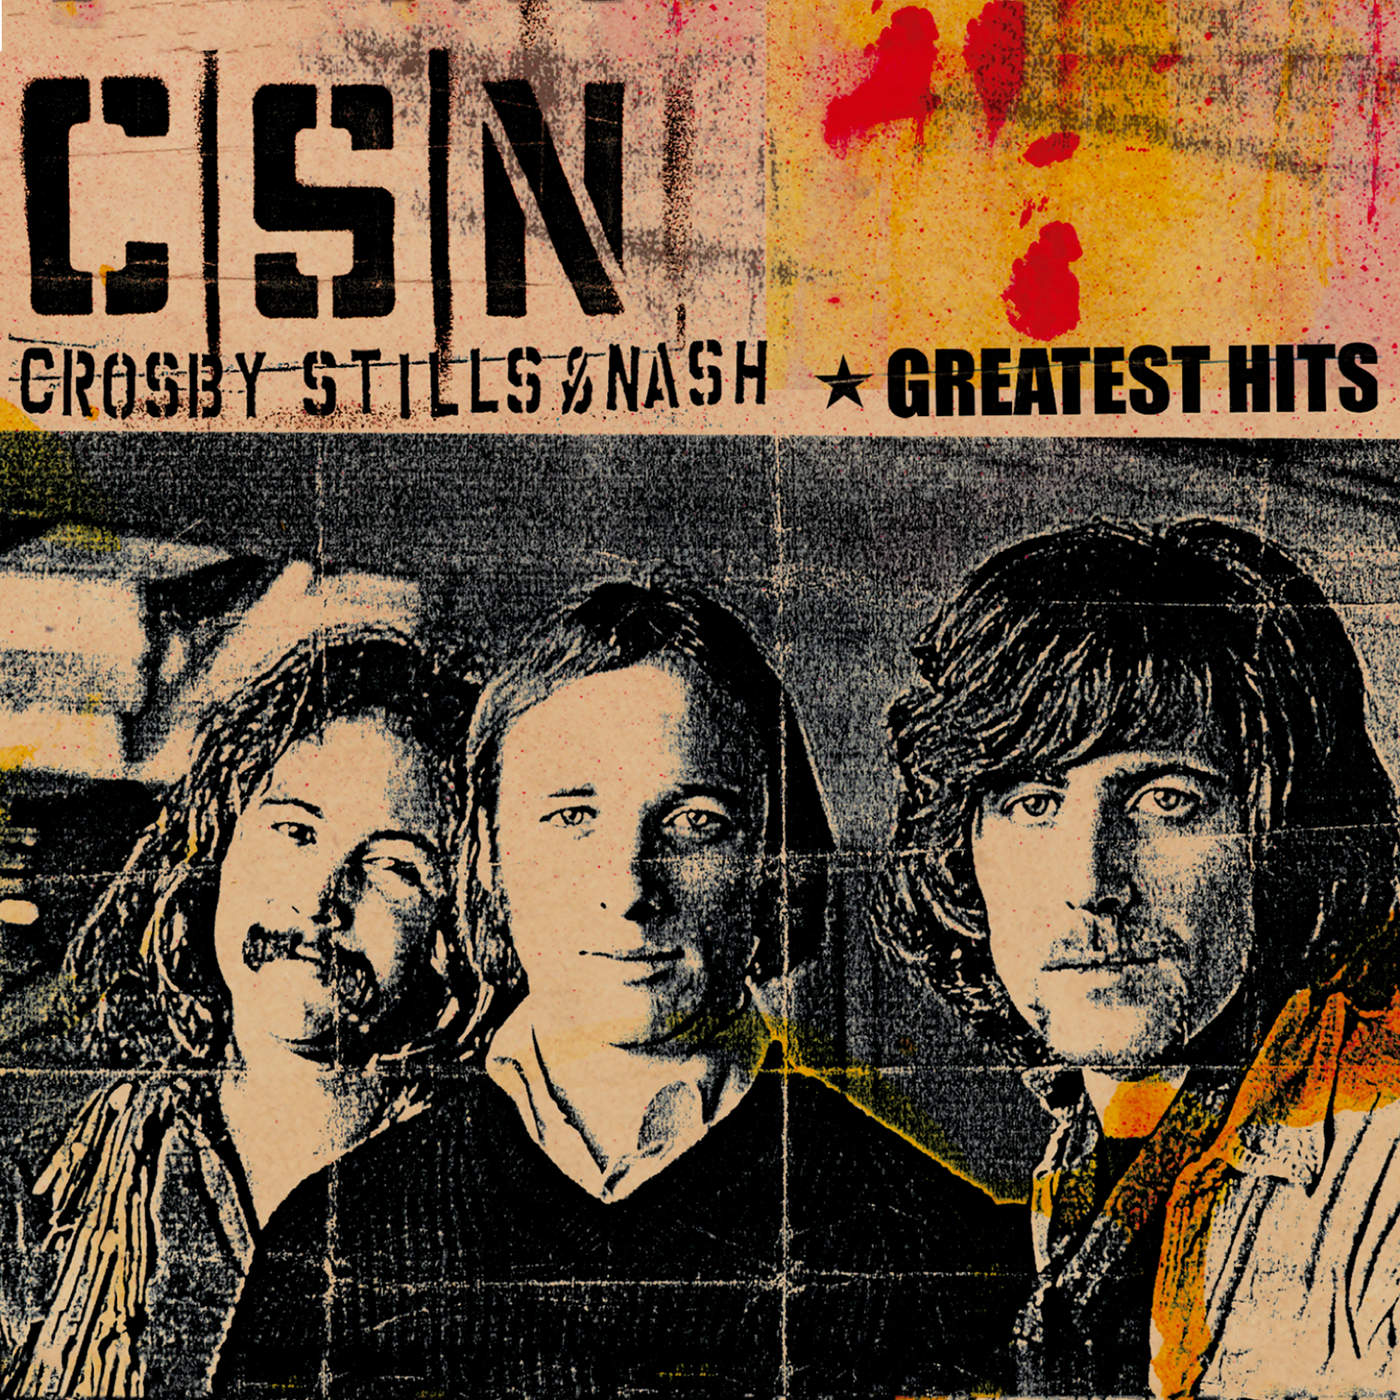 Art for Southern Cross by Crosby, Stills & Nash